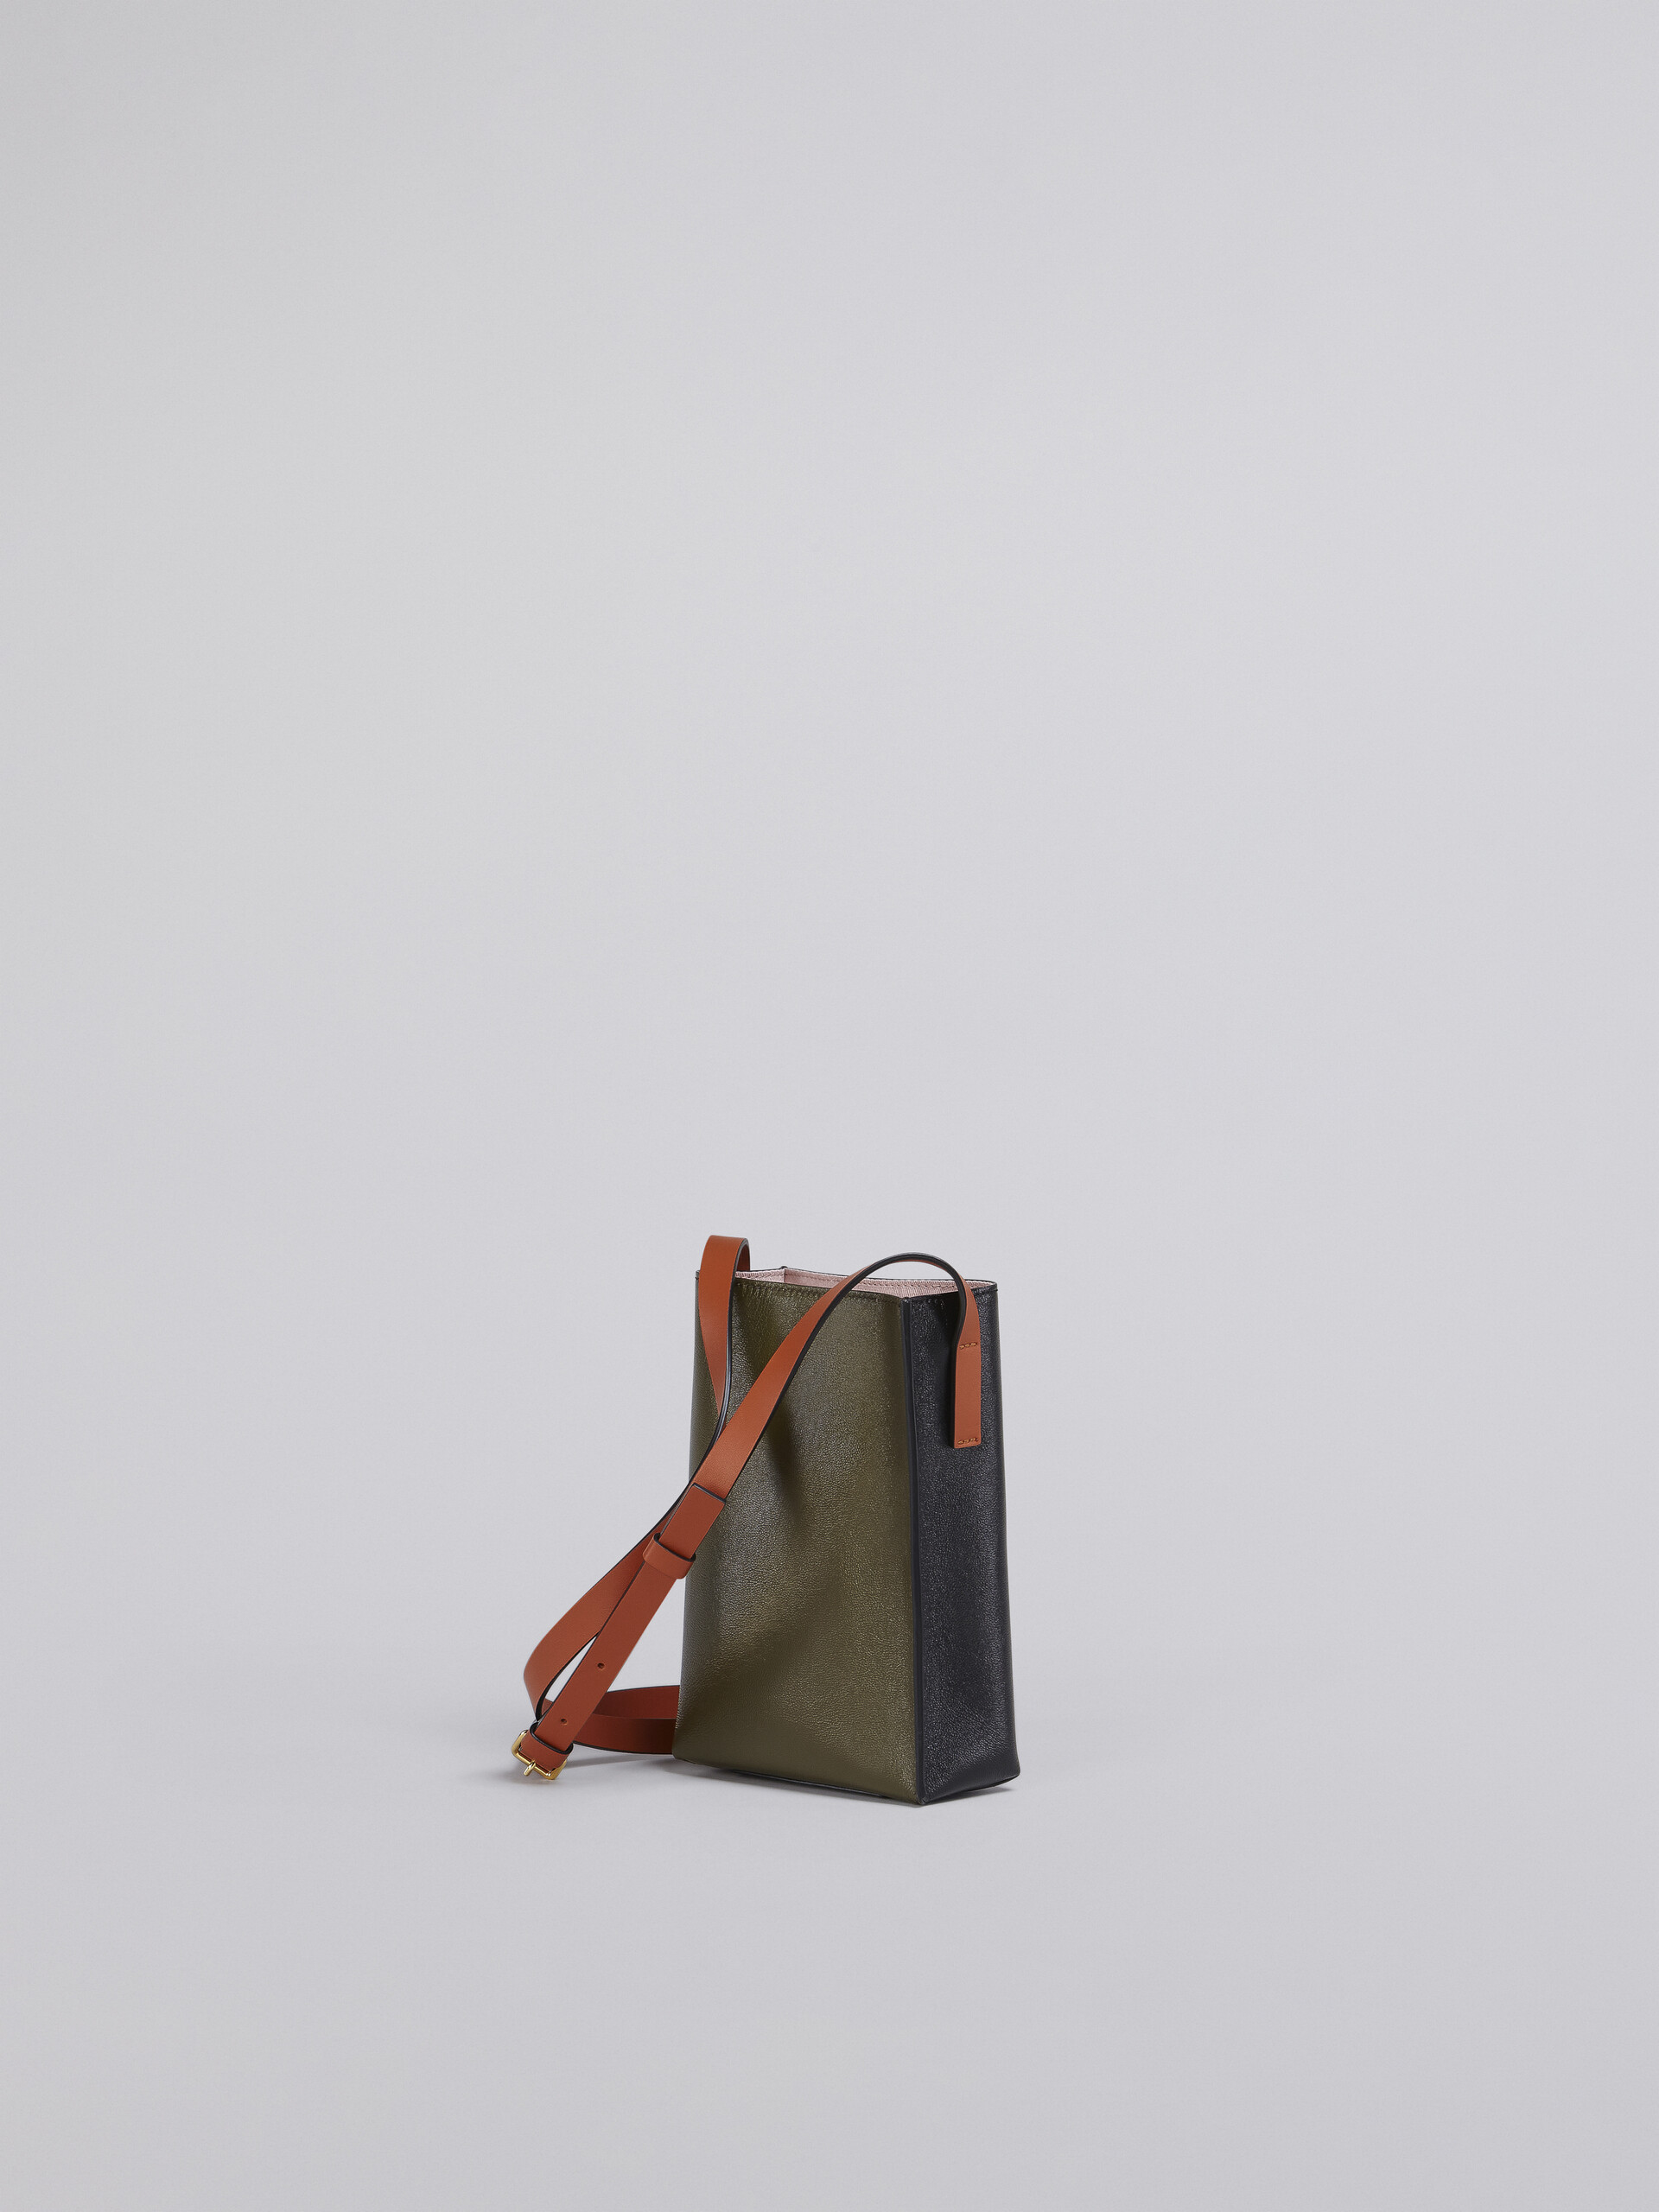 Museo Soft Nano Bag in black and grey leather - Shoulder Bags - Image 3